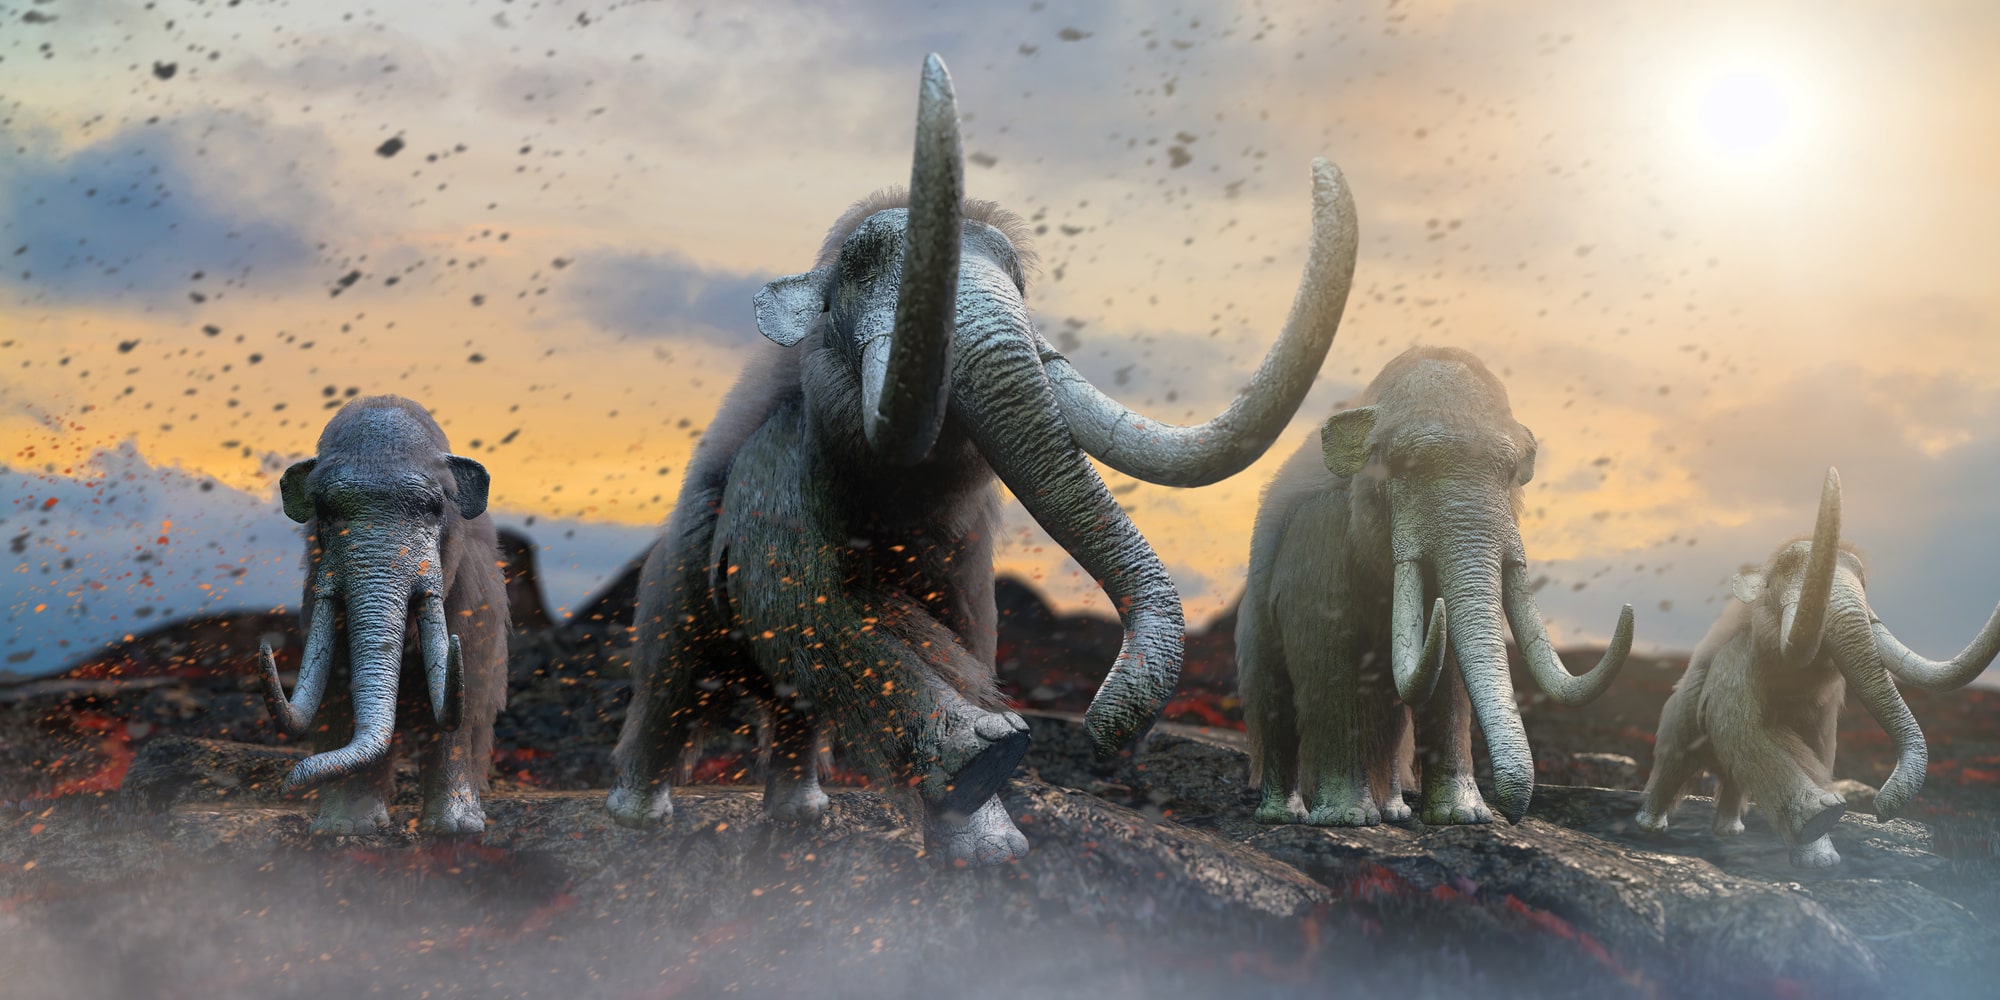 Big problems of big animals: how our ancestors managed to extinct entire species